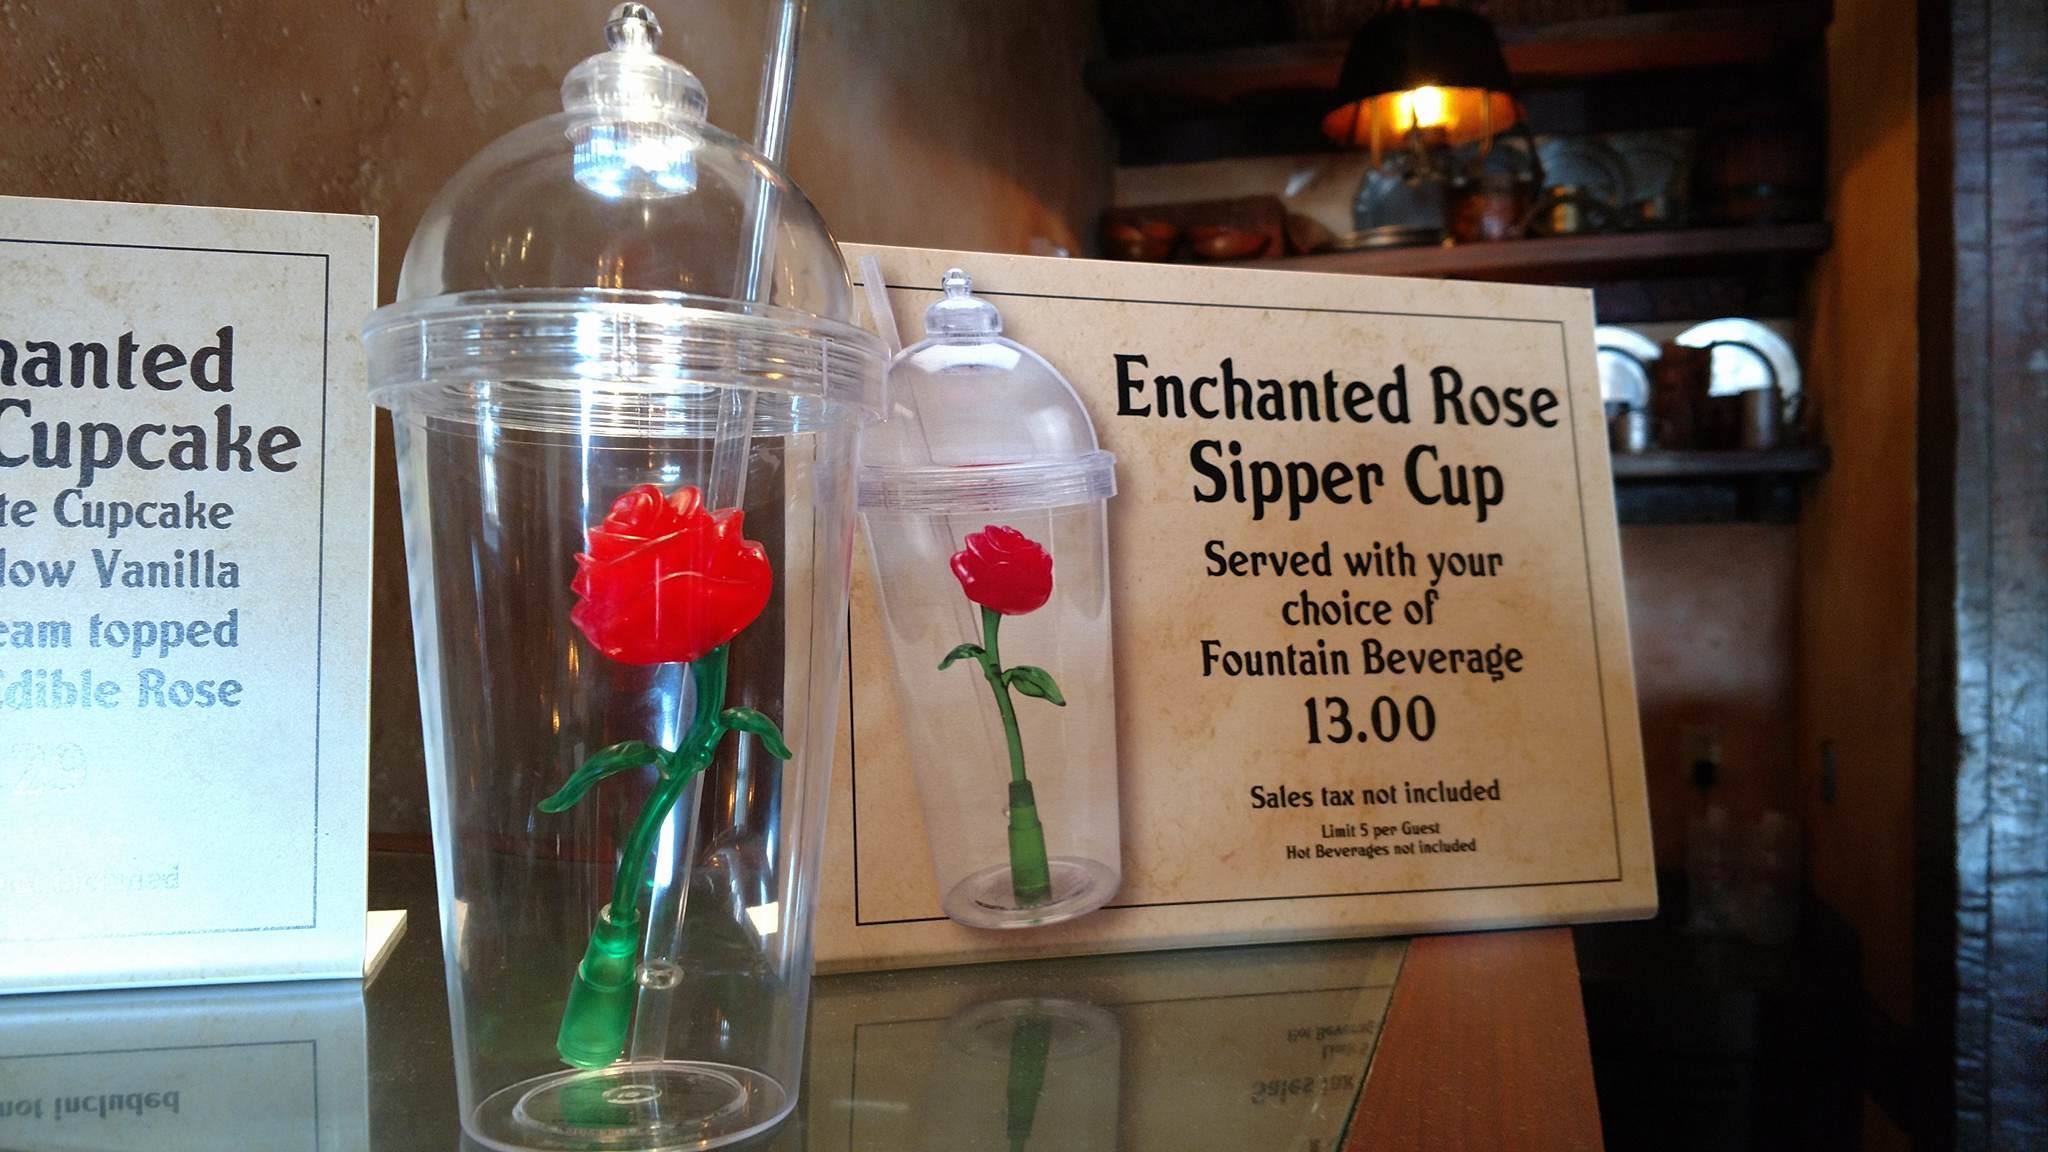 Beauty and The Beast-themed Enchanted Rose Souvenir Cup Now Available at Gaston’s Tavern